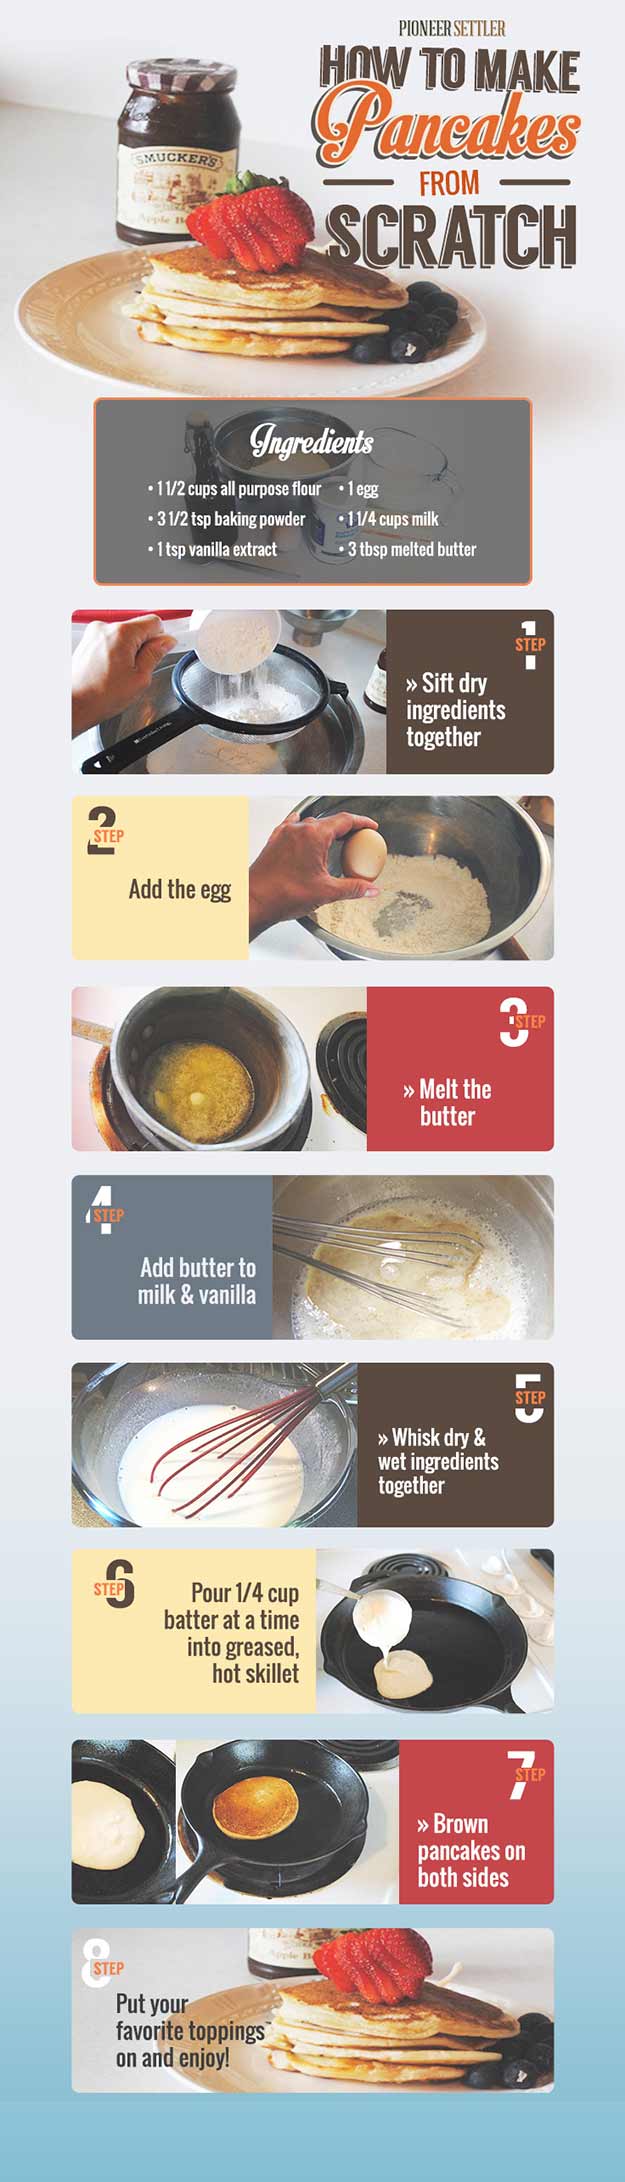 How to Make Pancakes from Scratch 